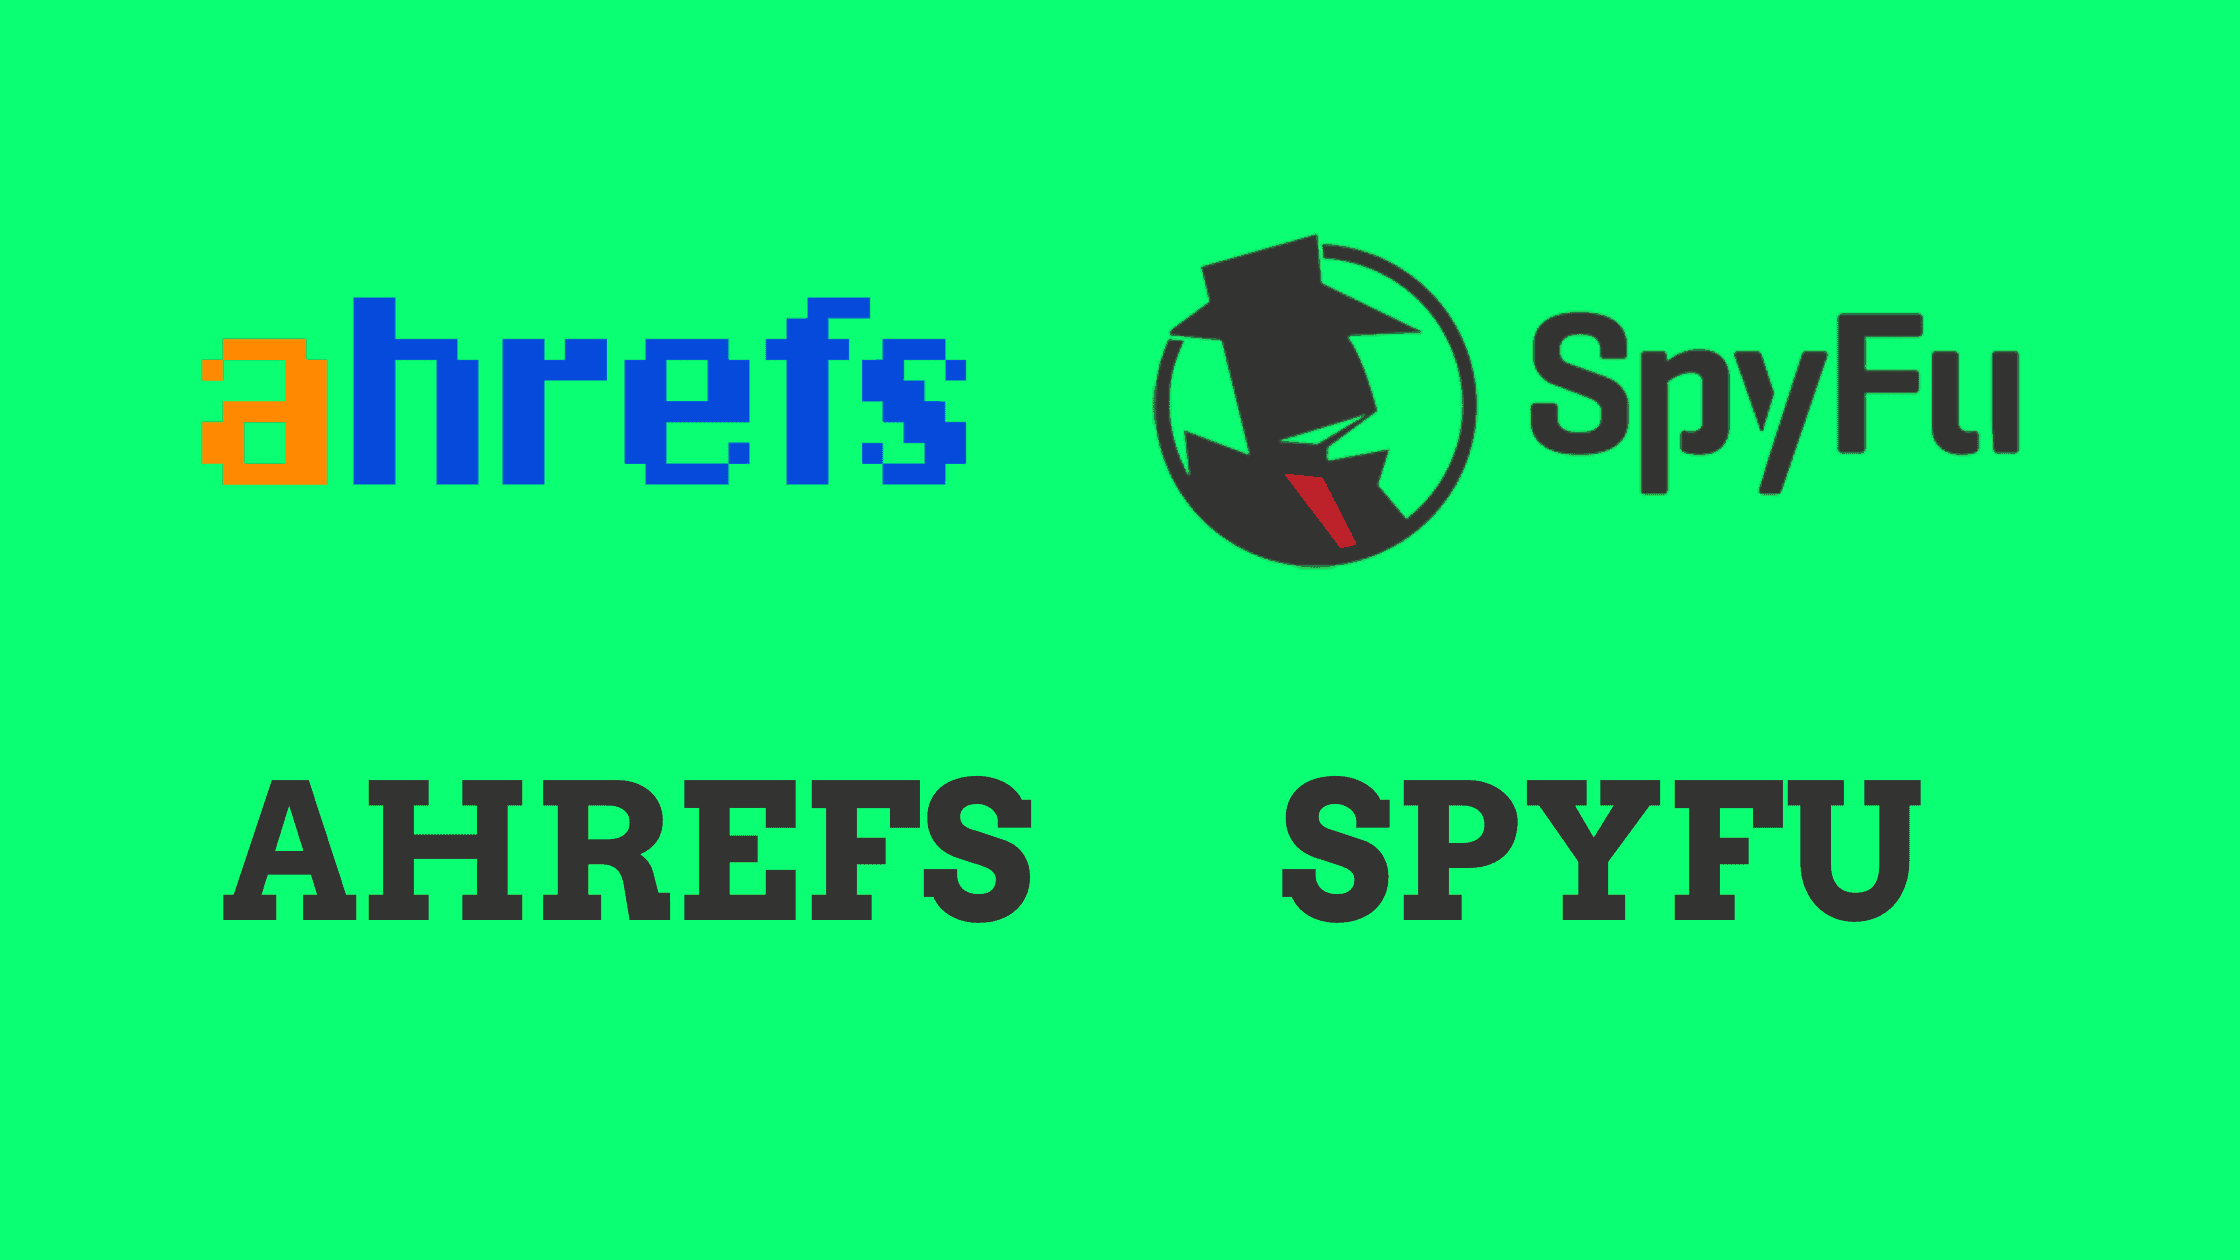 Alternative - Semrush is a great tool, here is the best Alternative tools in the market currently Ahrefs and Spyfu